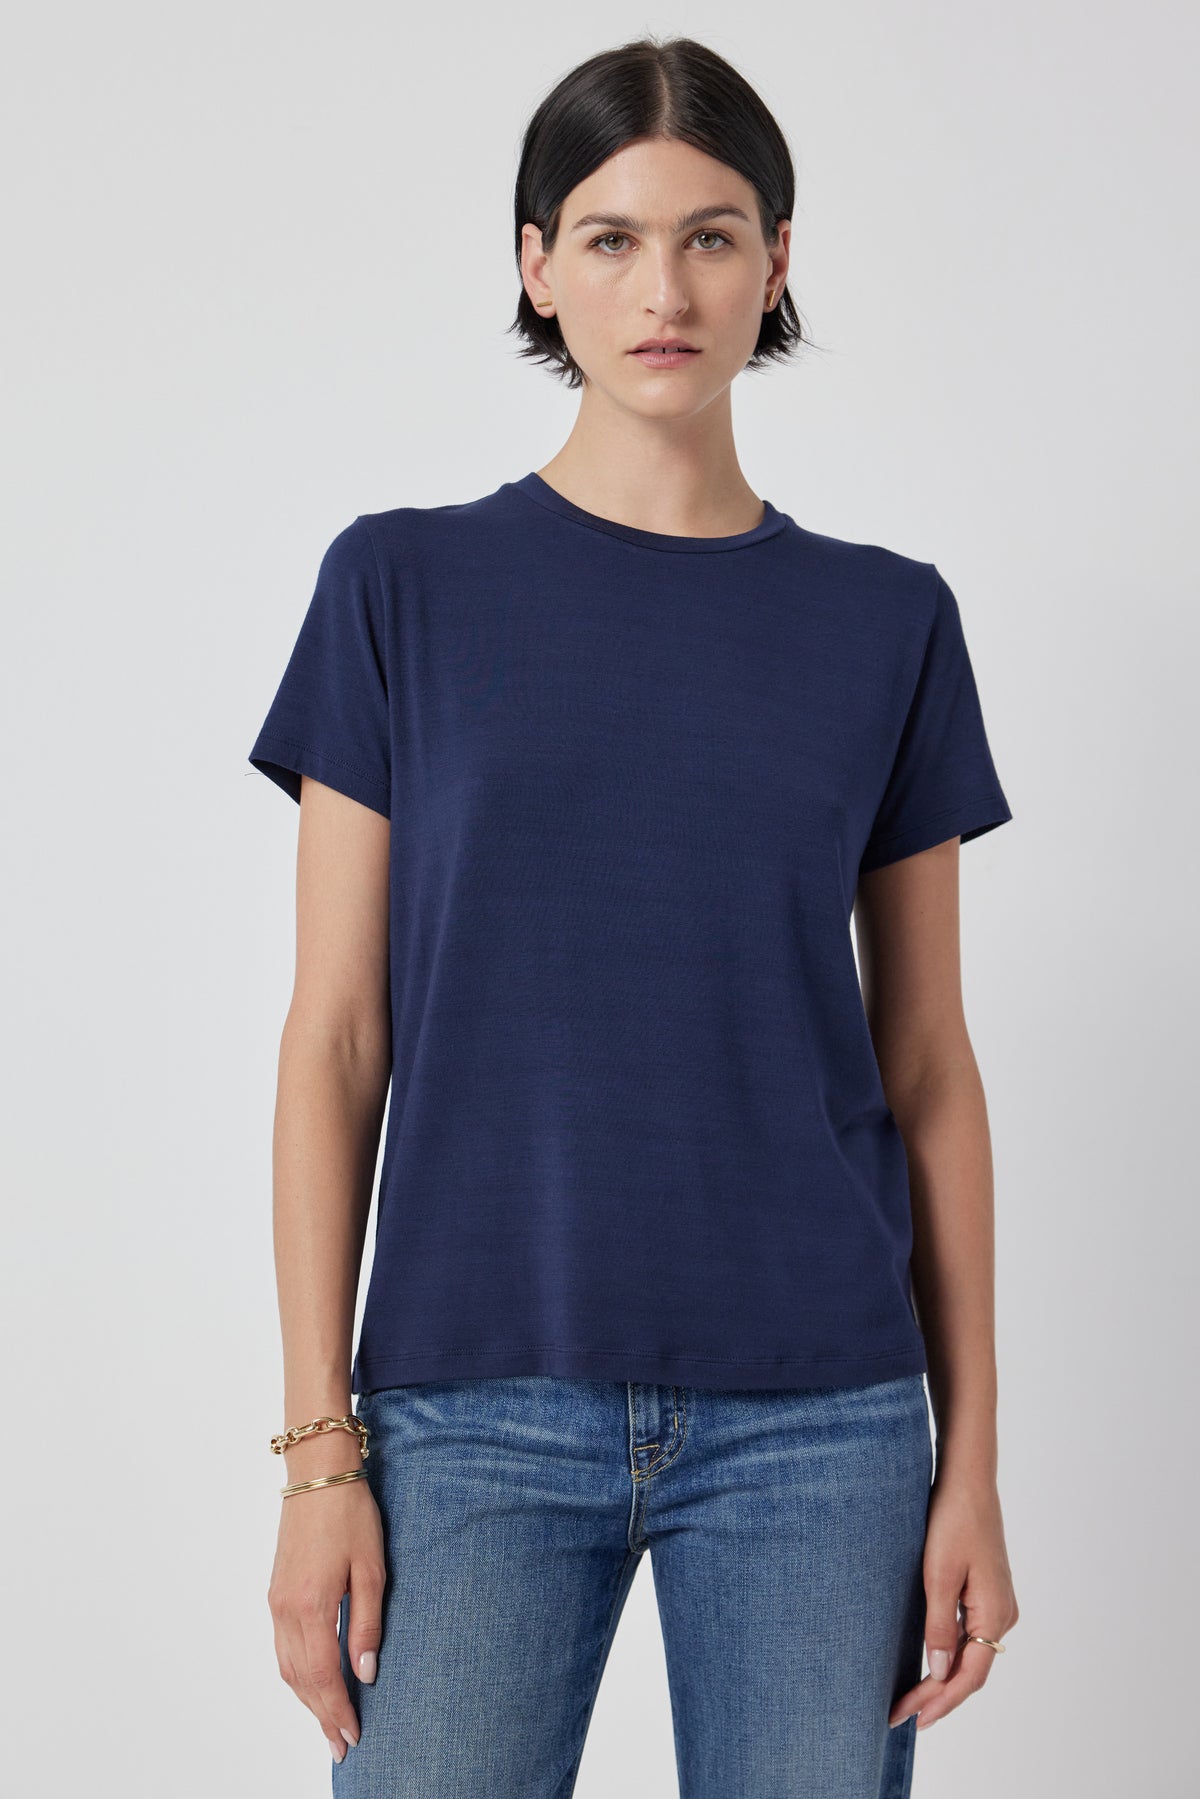 Woman wearing a SOLANA TEE by Velvet by Jenny Graham and jeans.-36463663841473